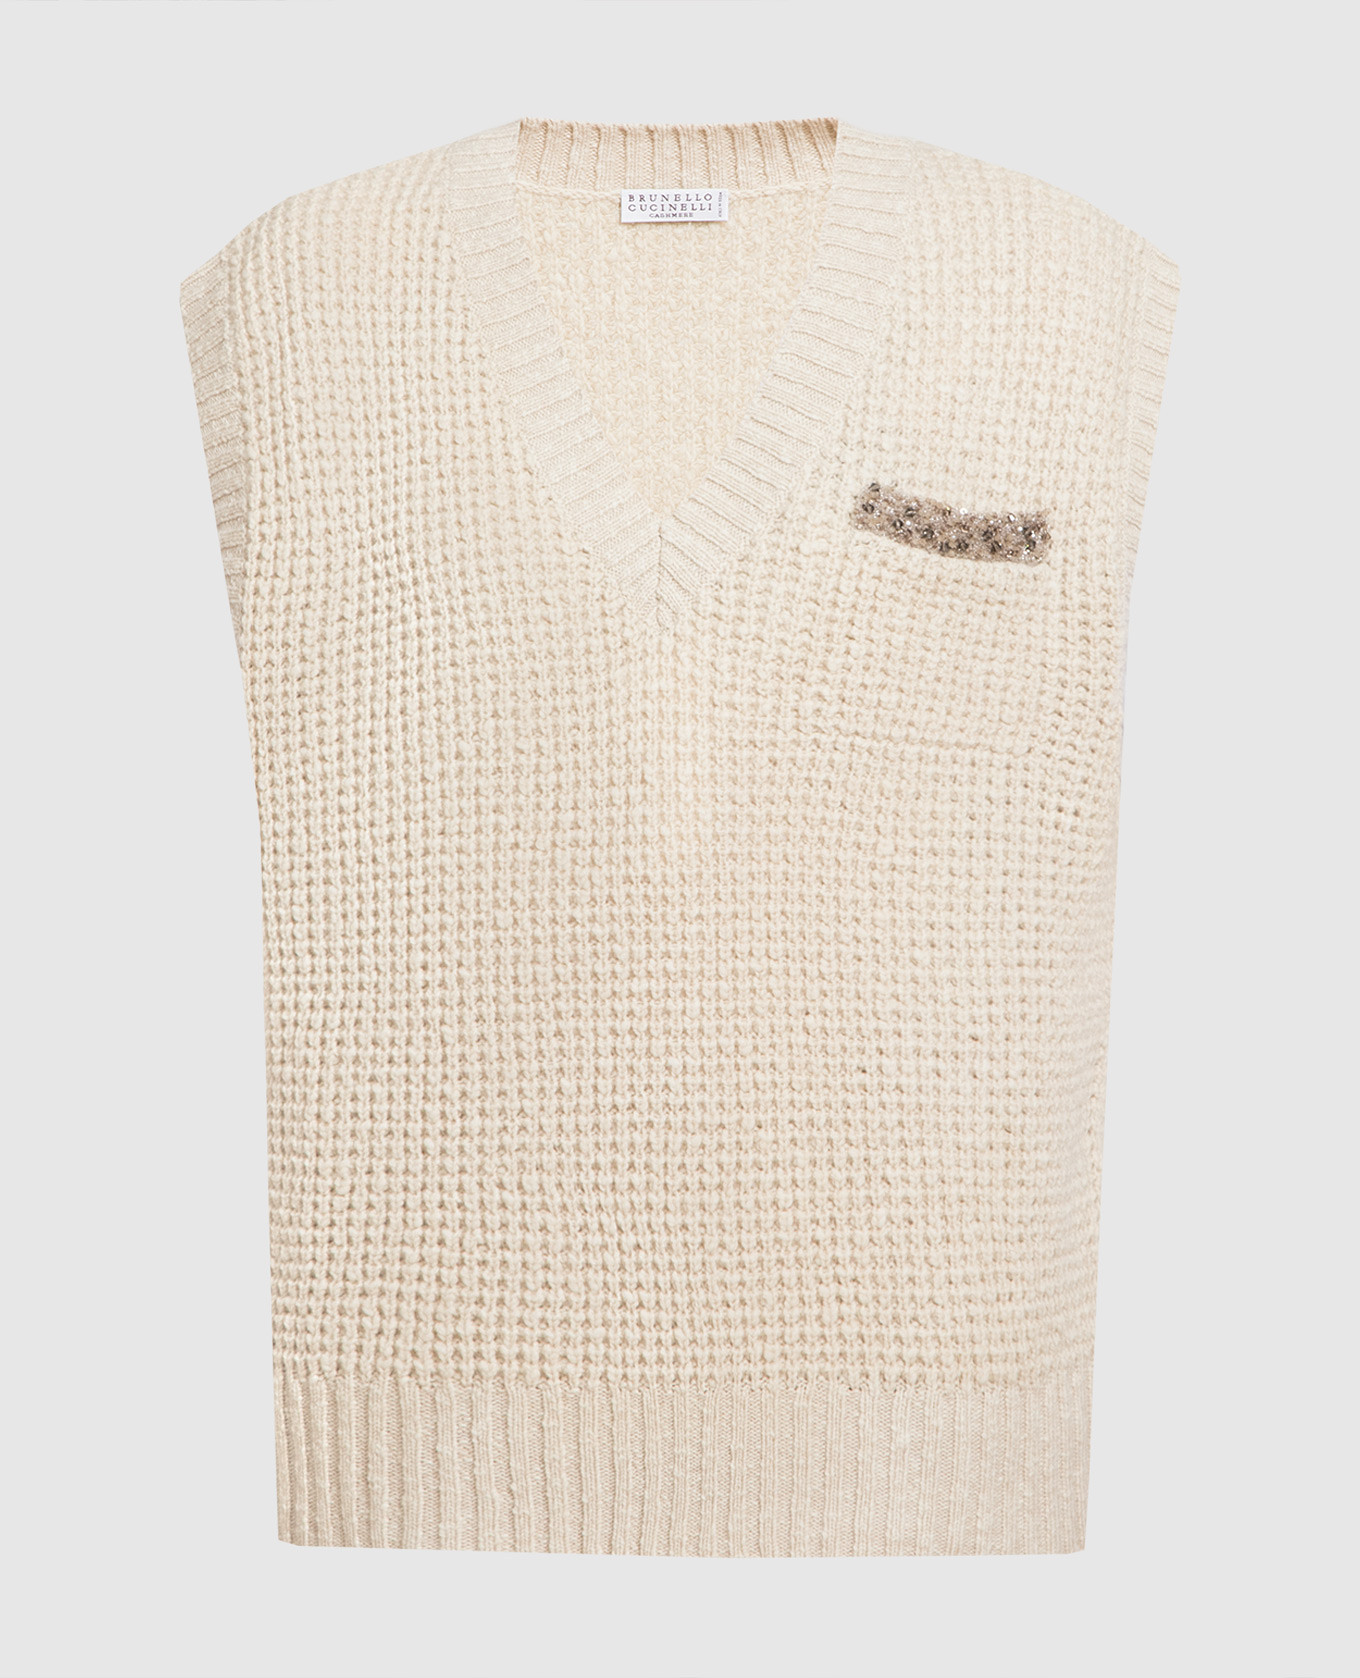 Beige vest made of wool and cashmere